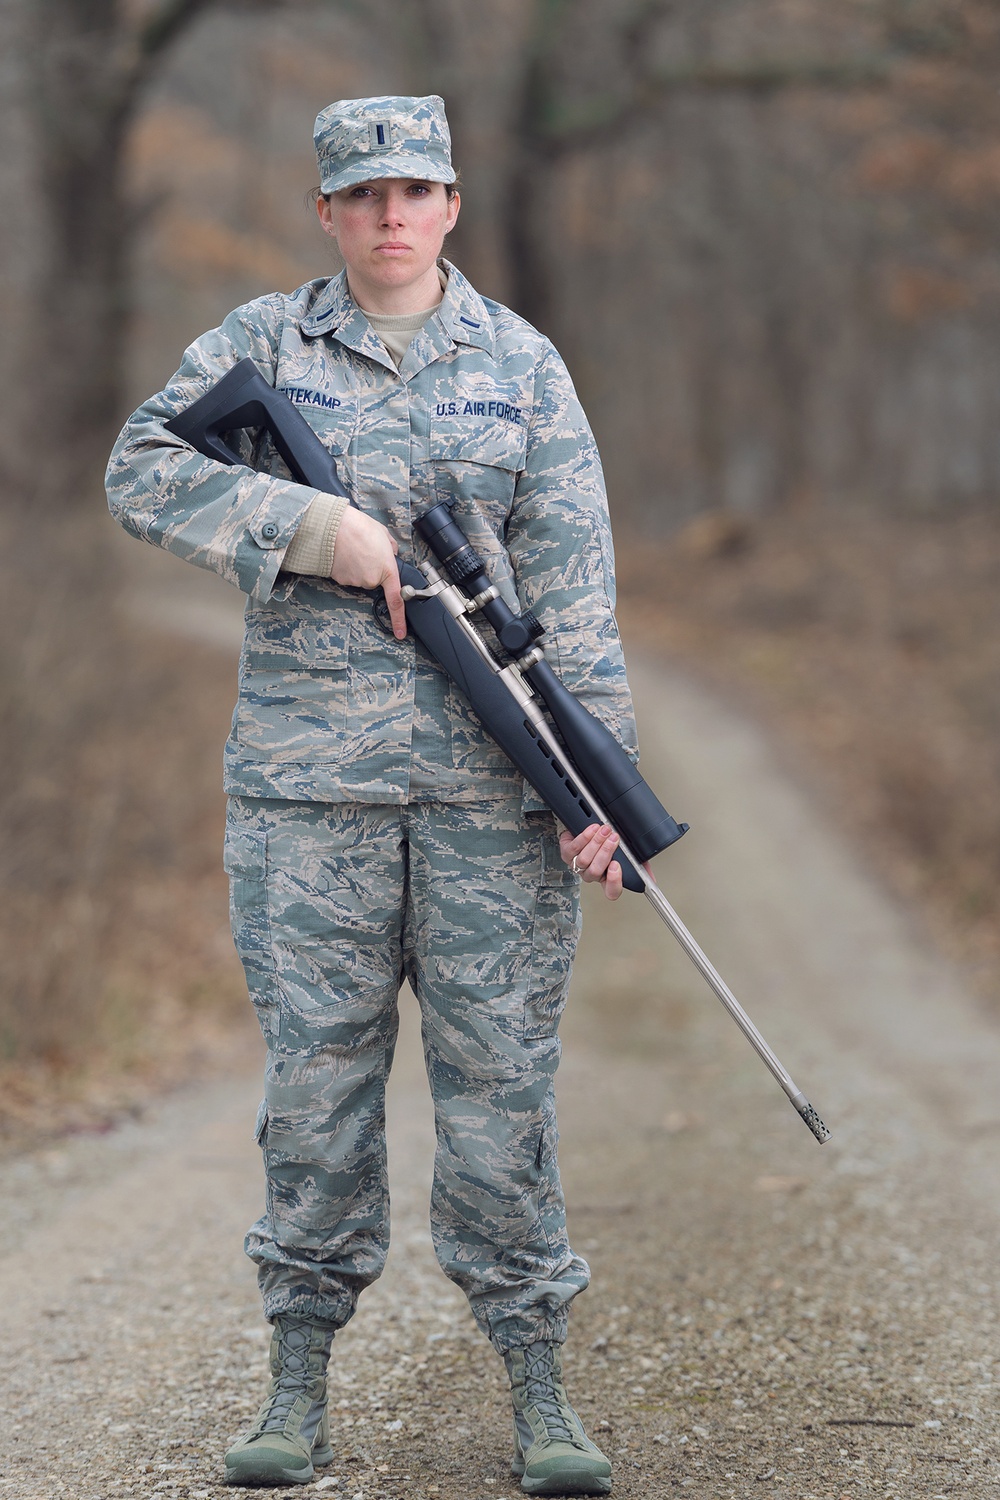 On Target: Illinois Guard Human Resource Officer Was Air Force’s First Female Sniper